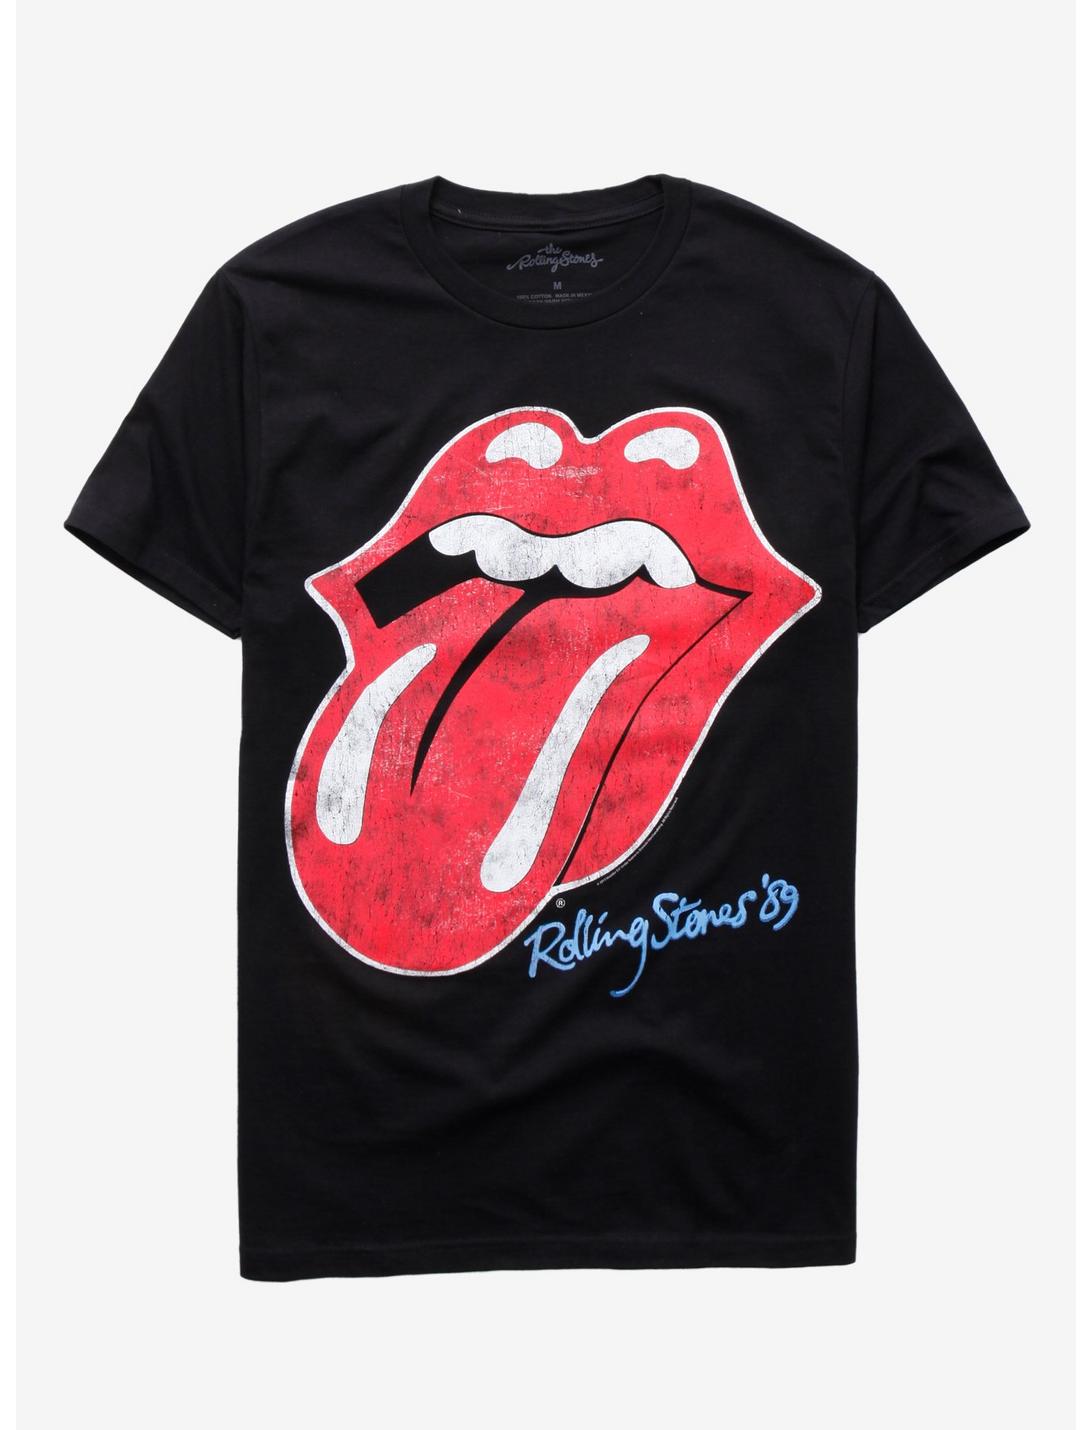 Black The Rolling Stones 'Classic Tongue' NEW & OFFICIAL! Kids T-Shirt